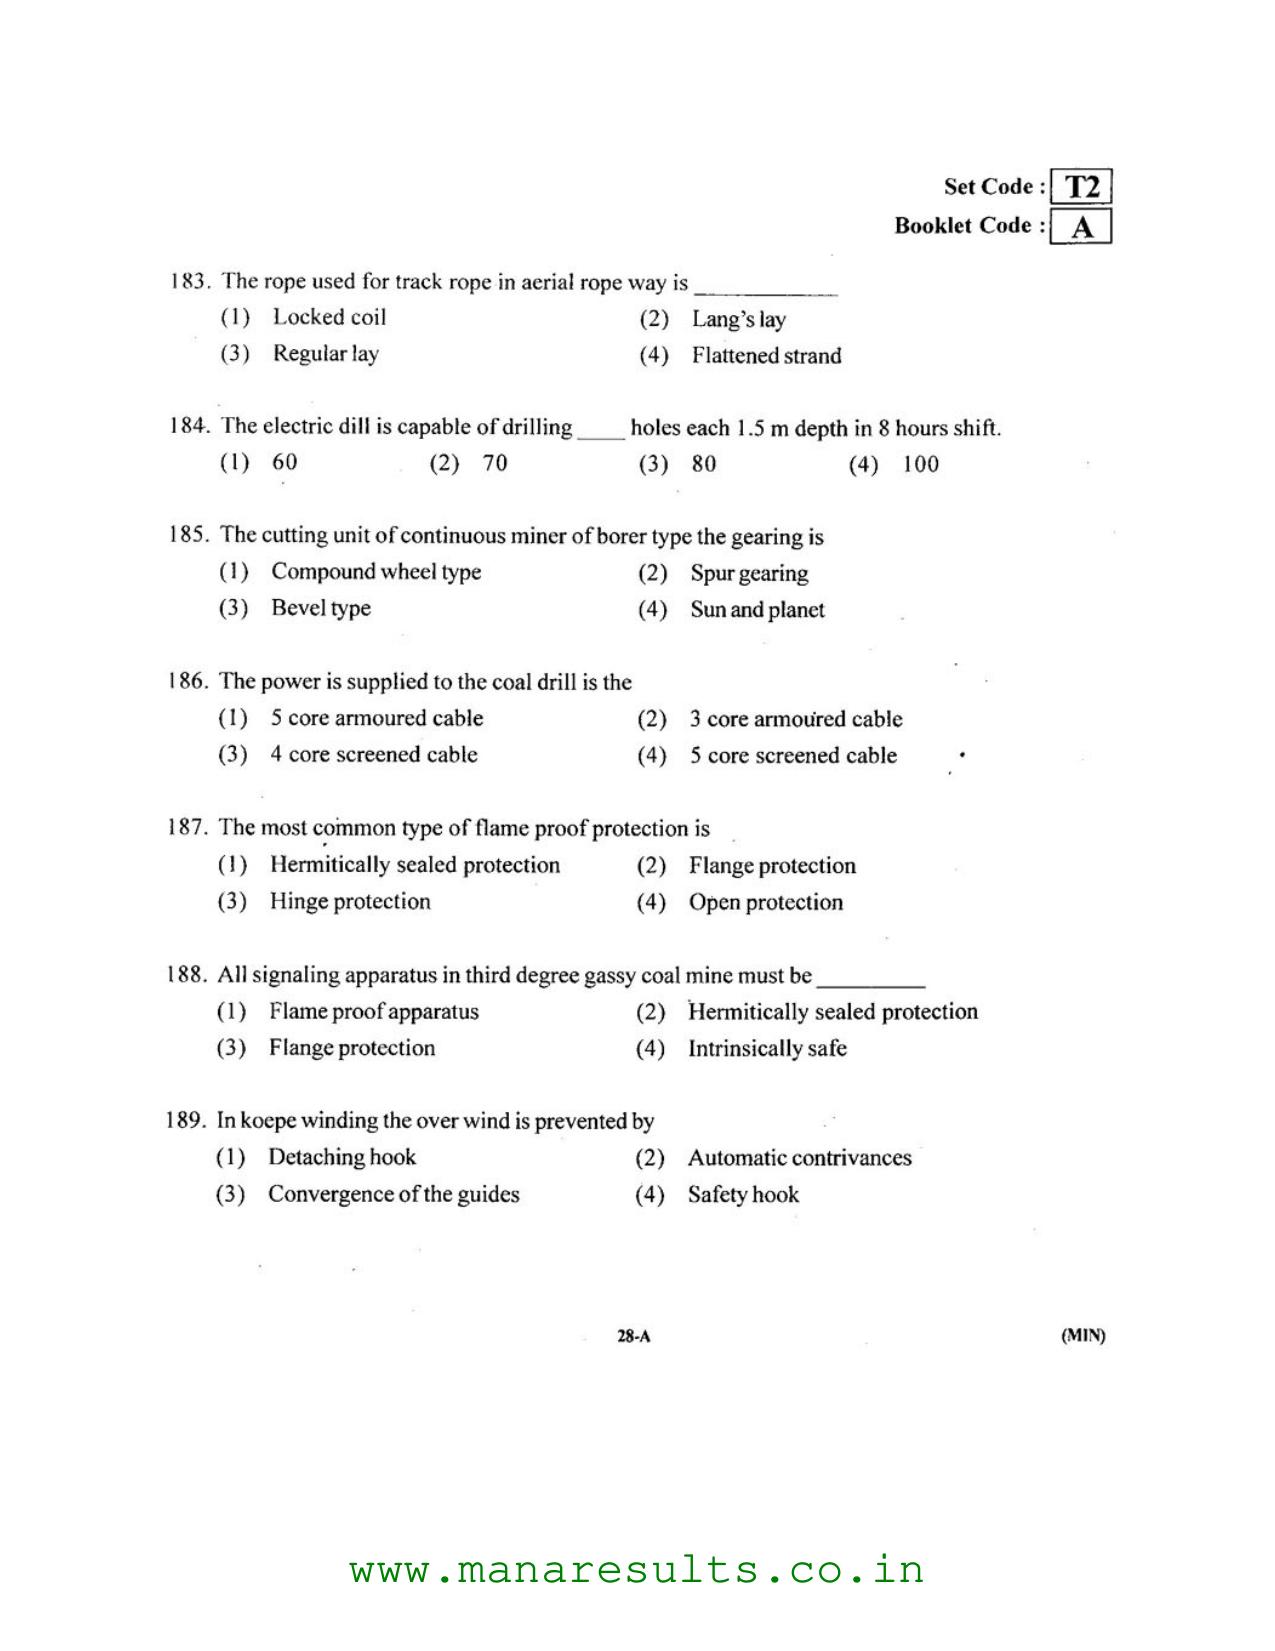 AP ECET 2016 Mining Engineering Old Previous Question Papers - Page 27